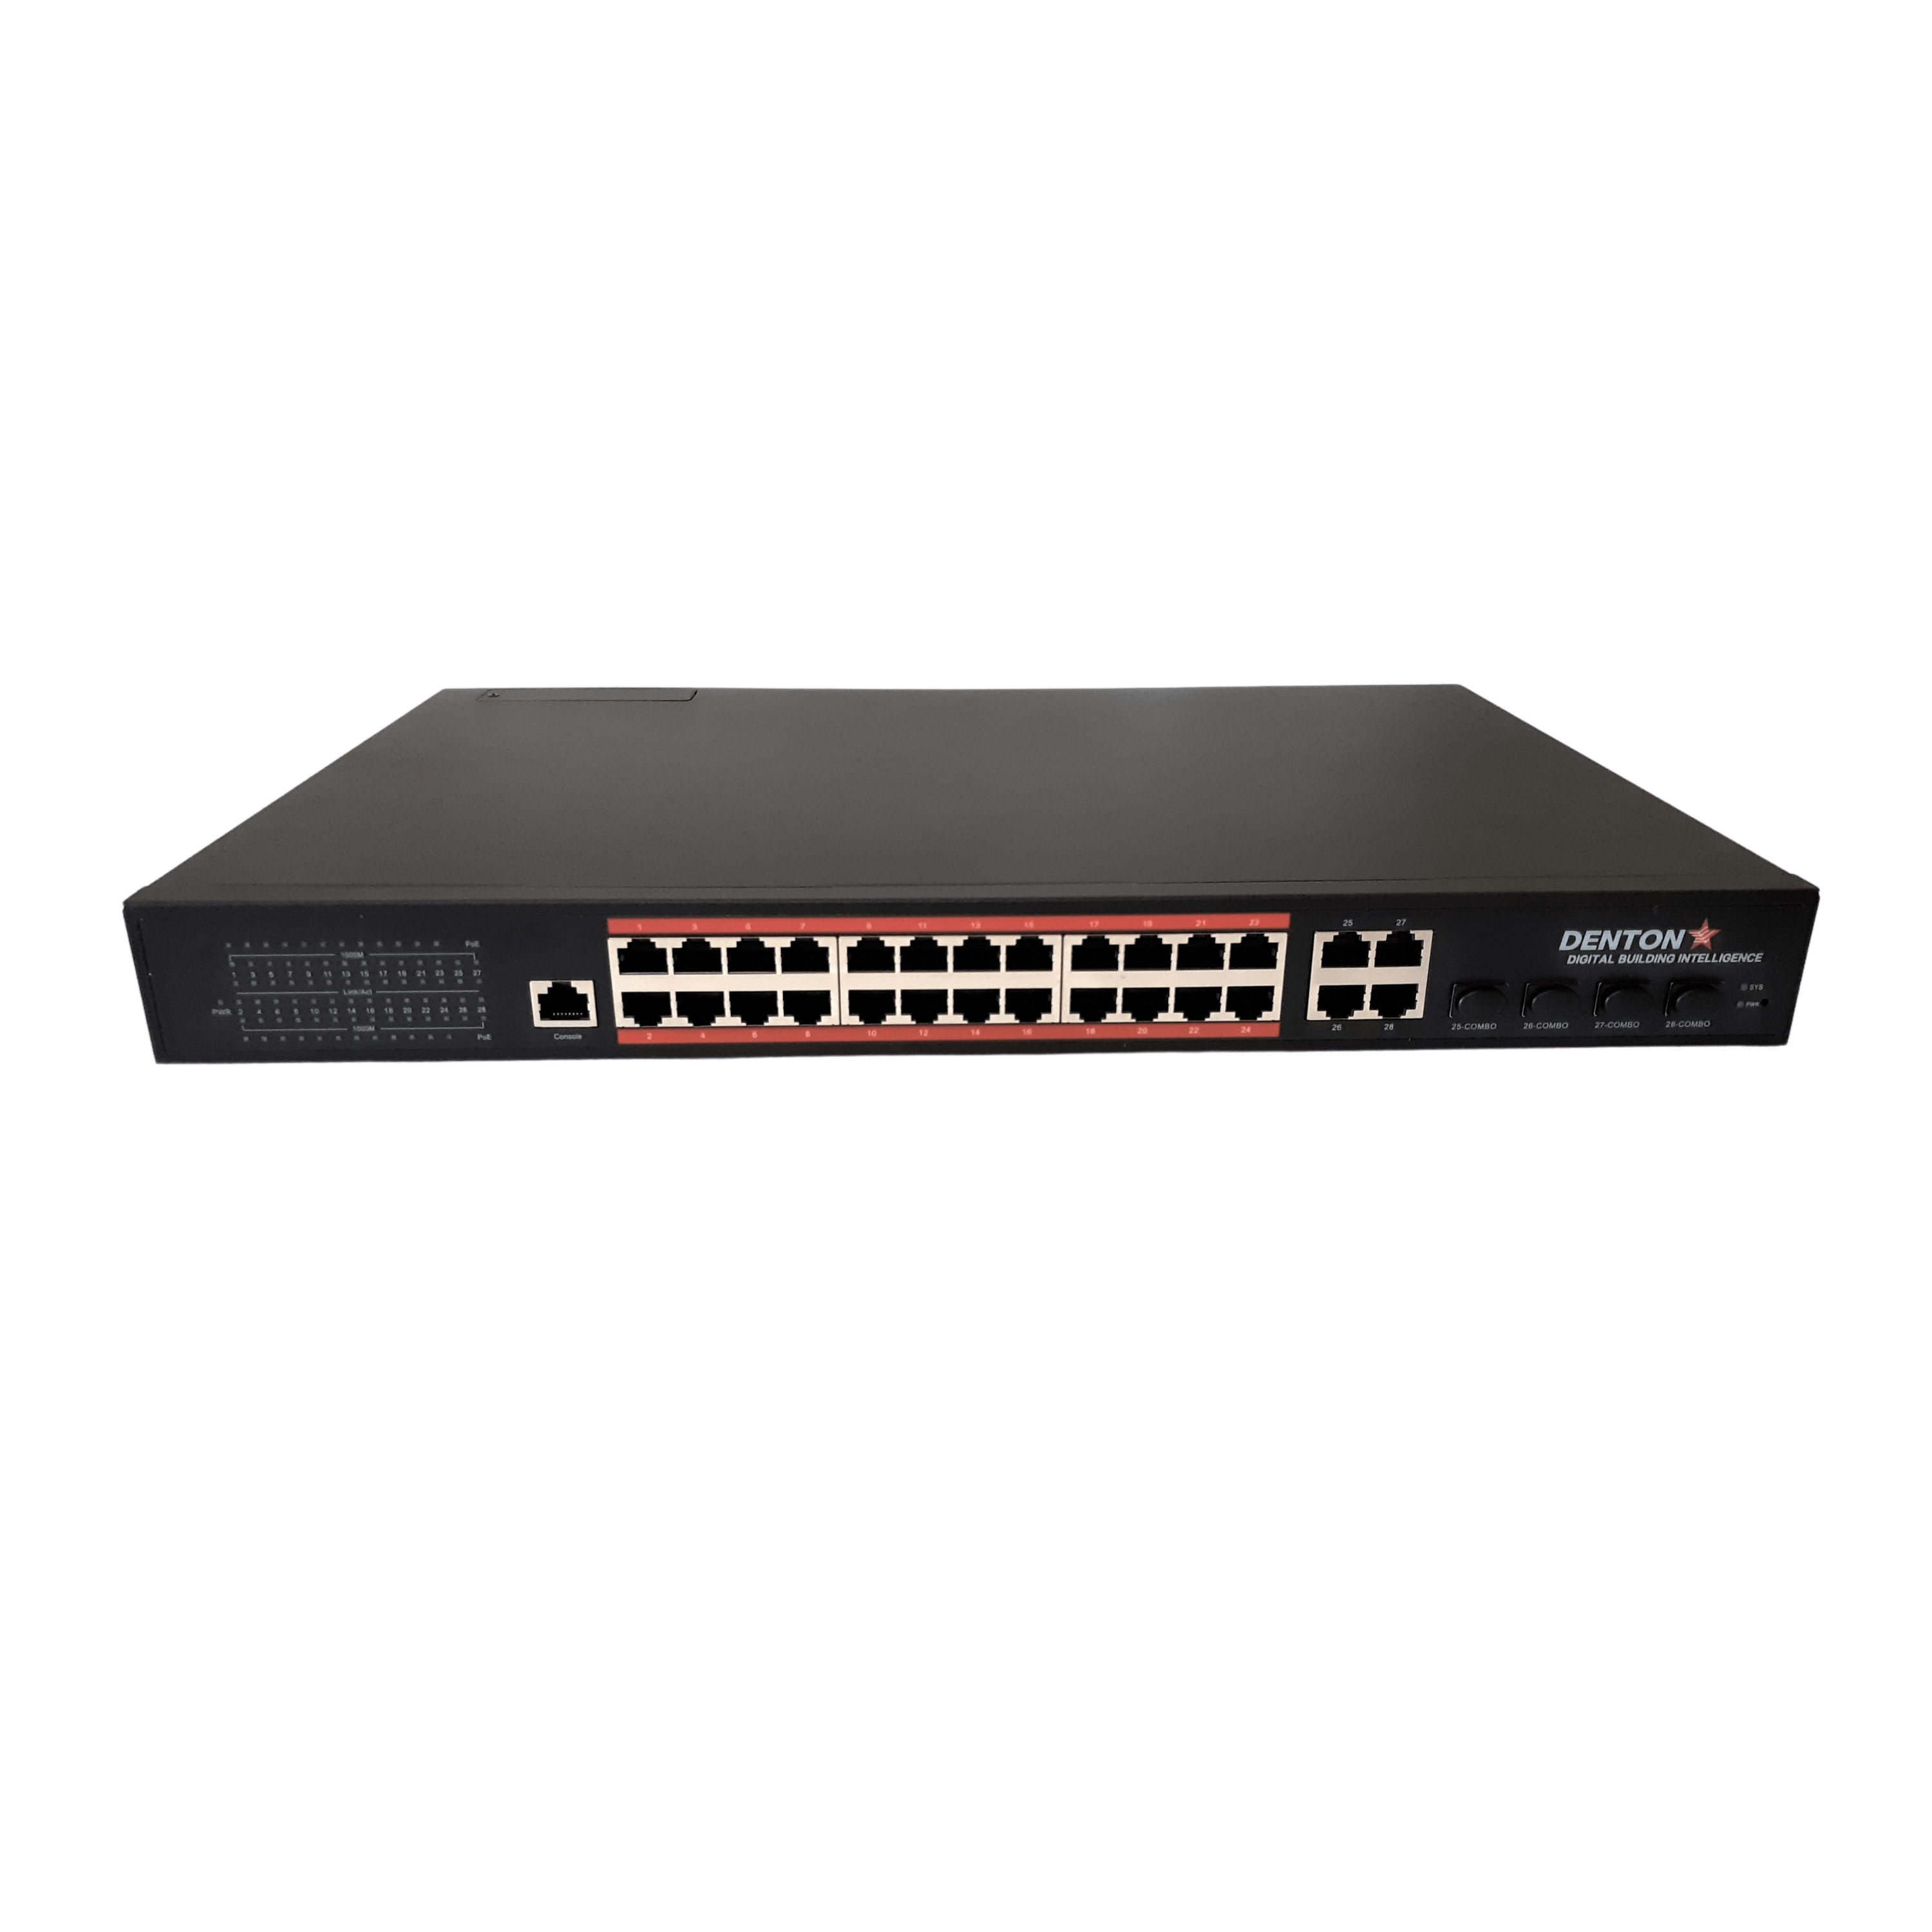 POE Texas Switch Fanless 24-Port Gigabit Layer 2 Managed IEEE 802.3bt Switch with 53V3000W Power Supply